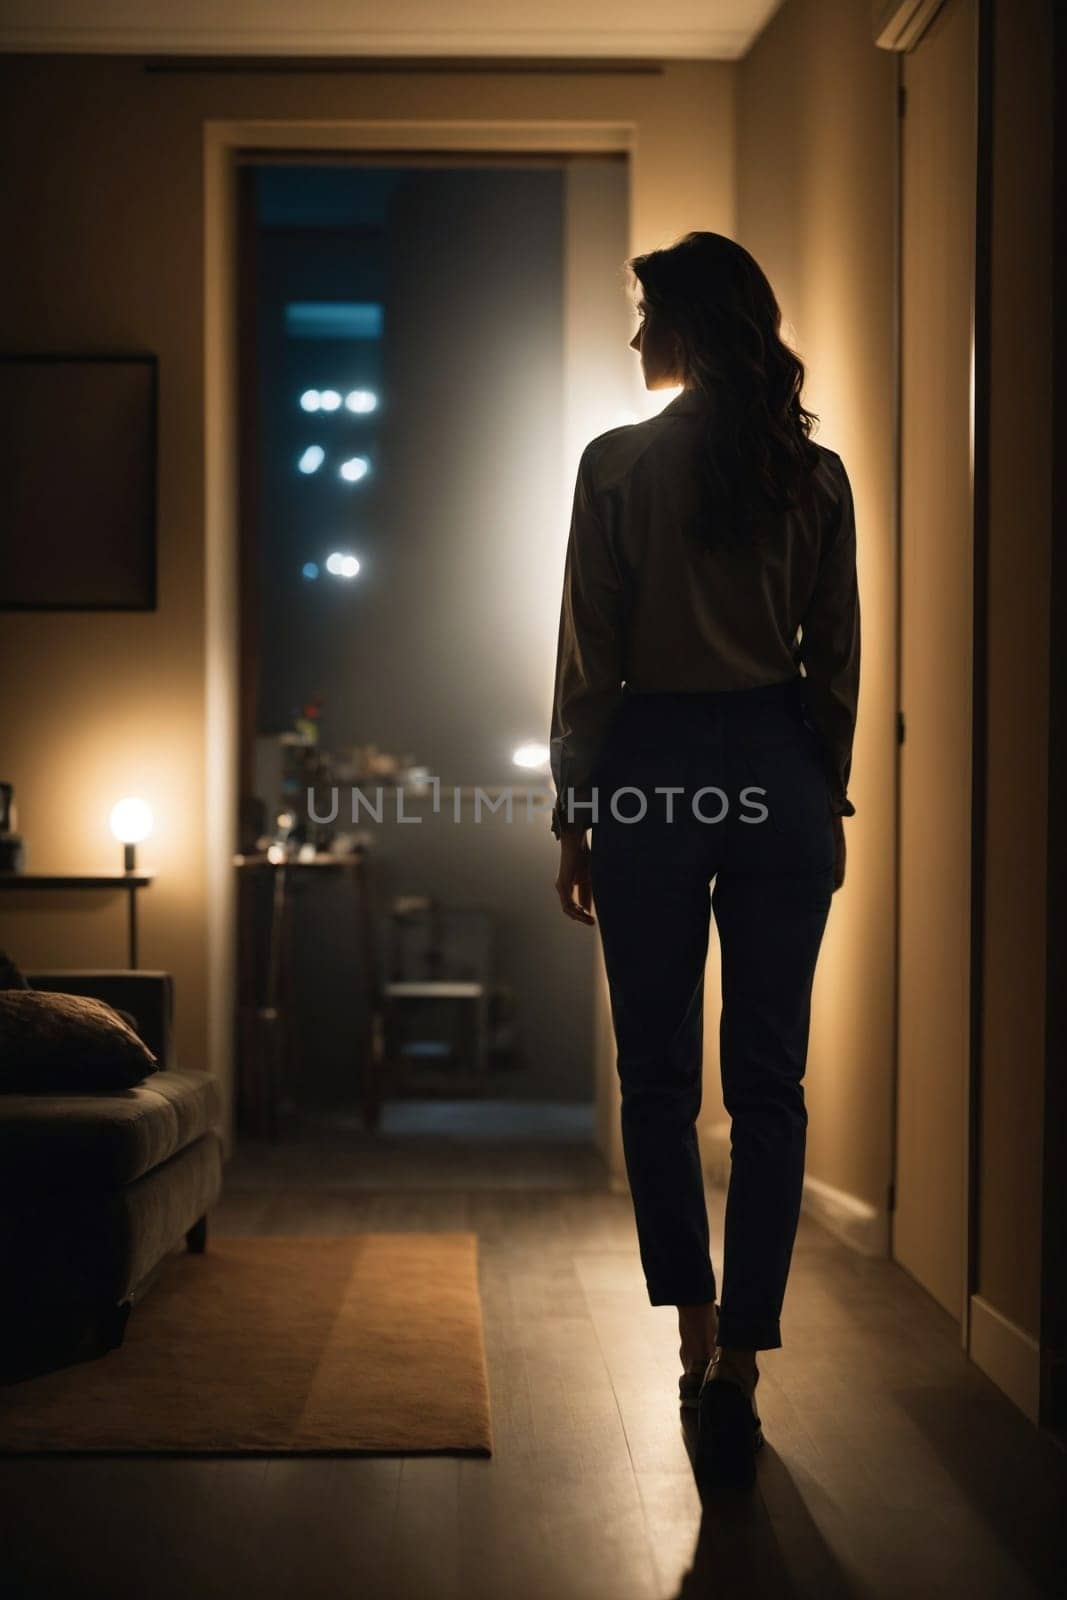 A woman walking through a hallway in a residential house.